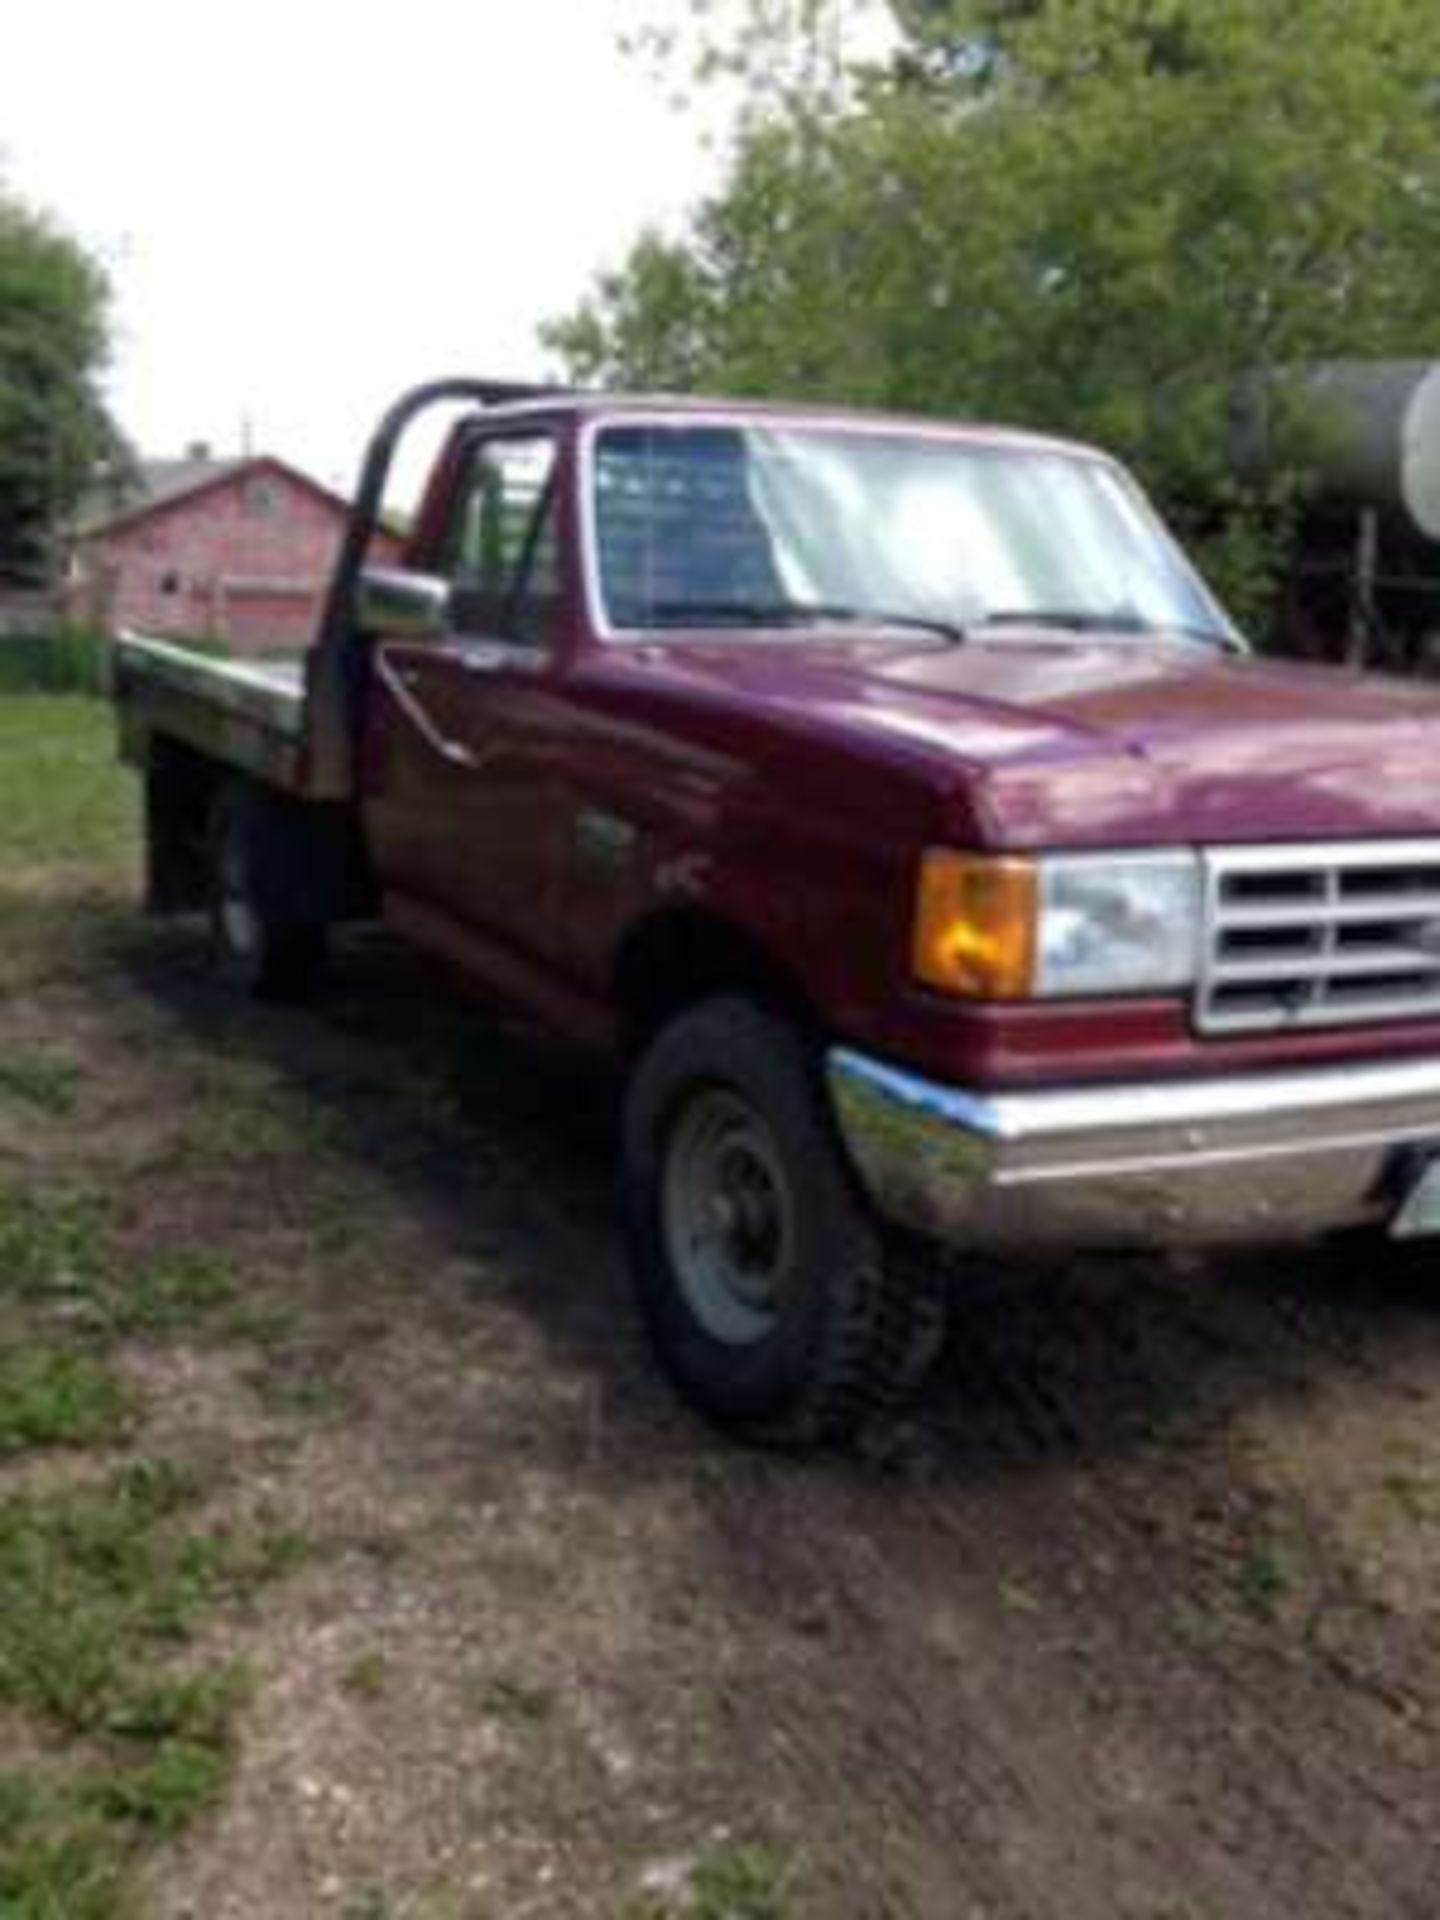 1989 Ford F250, gas, 4X4, DewEze Hydro Deck, 69,000kms, s/n 2FTHF26H3KCA68556 (Previously registered - Image 3 of 10